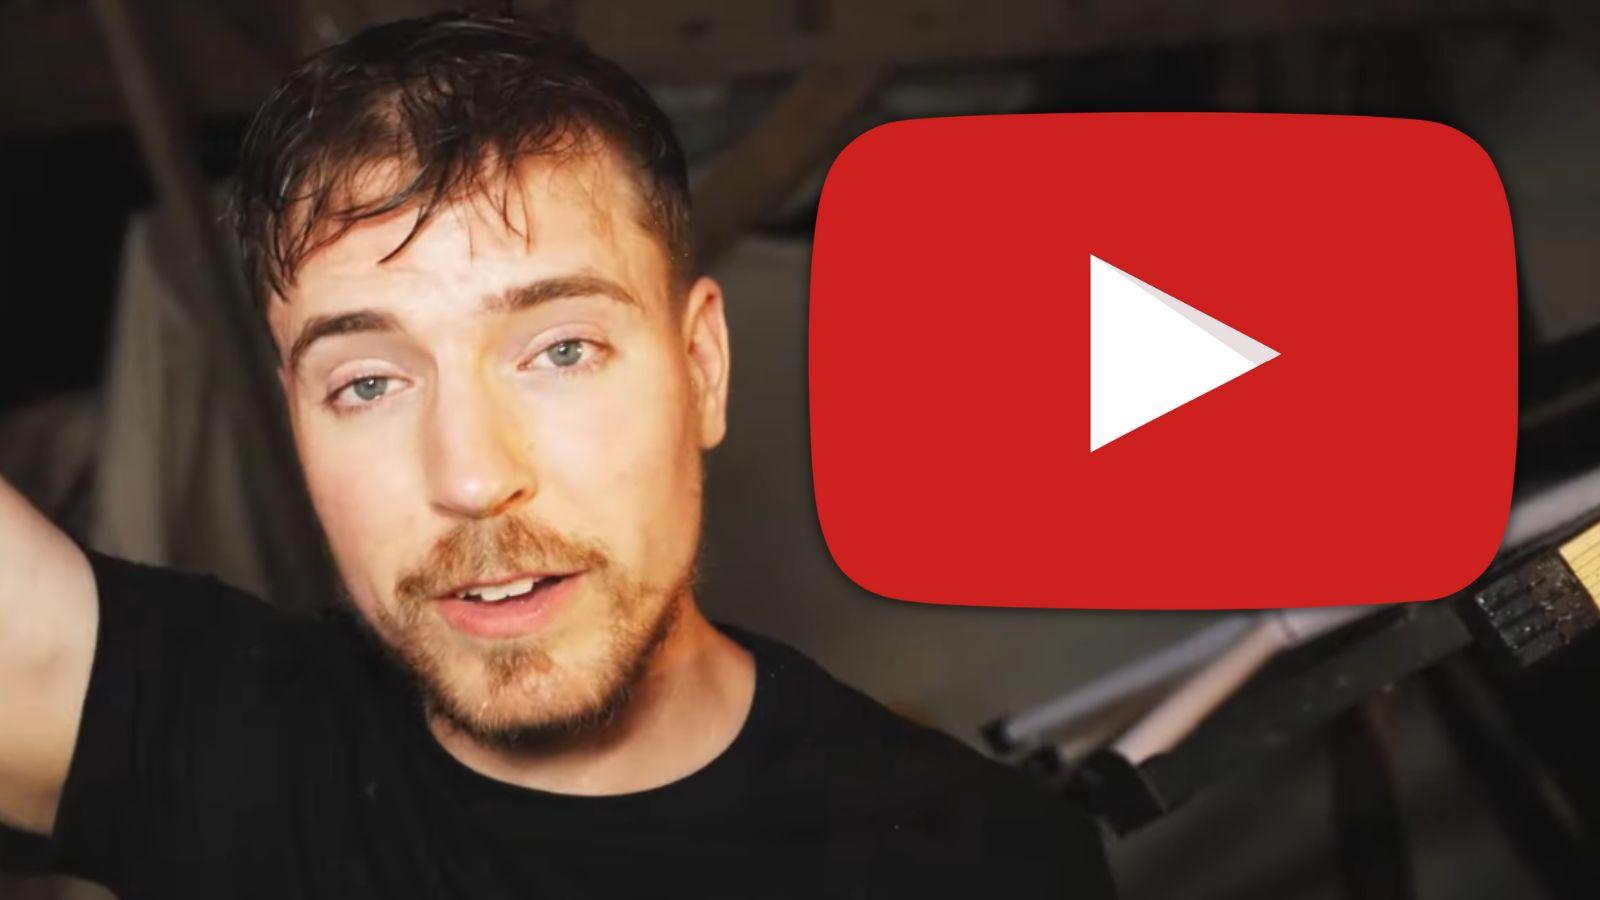 Bro Really Became the Beast in MrBeast”- Fans Share Their Positive